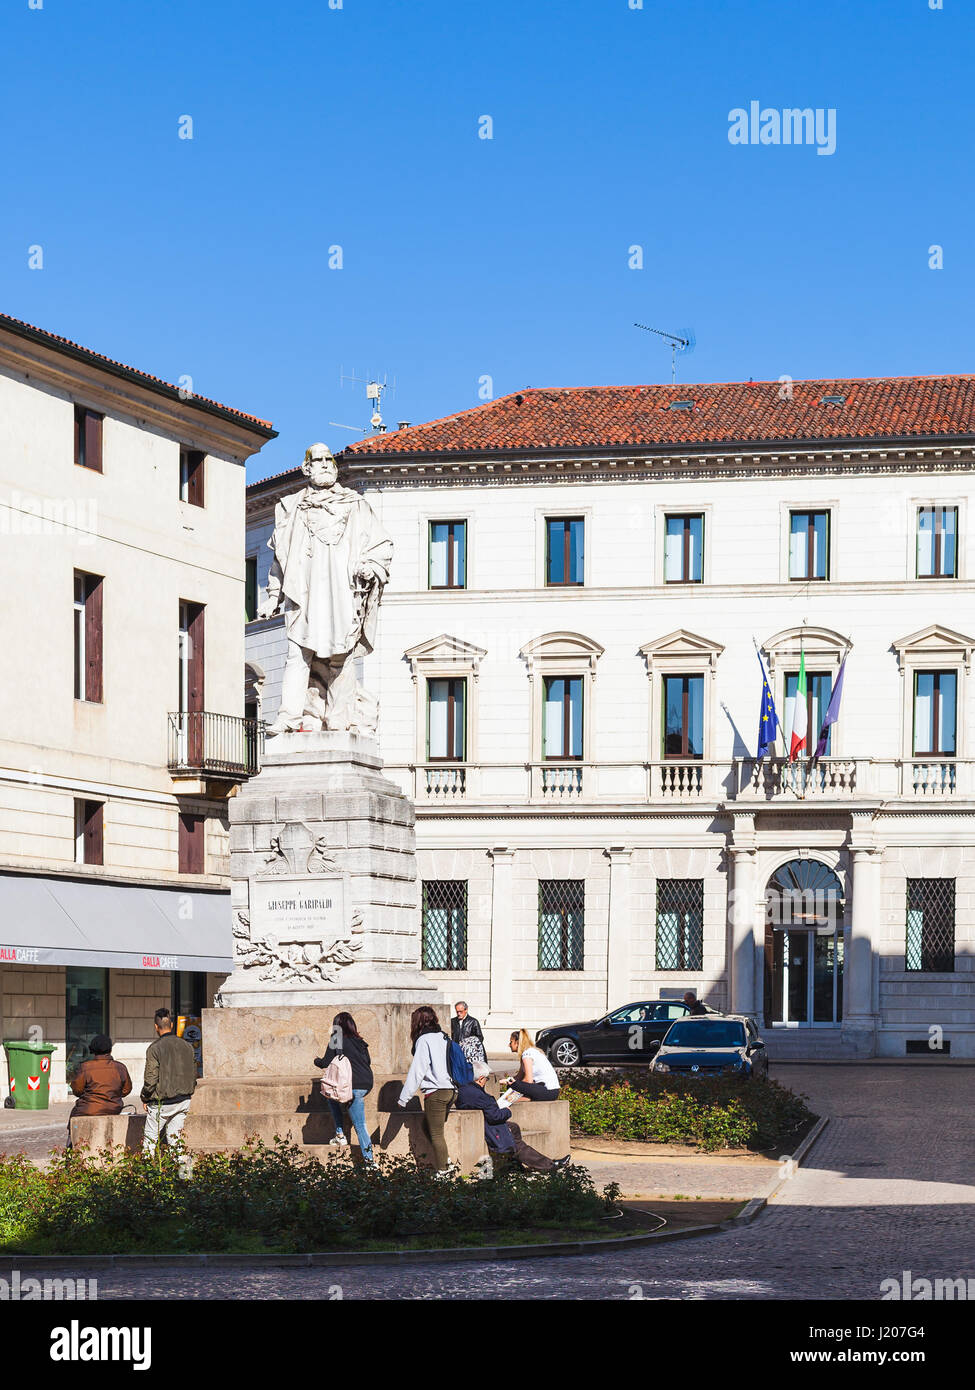 VICENZA, ITALY - MARCH 28, 2017: people near Monument Giuseppe Garibaldi on Piazza del Castello in Vicenza in spring. The city of Palladio has been li Stock Photo